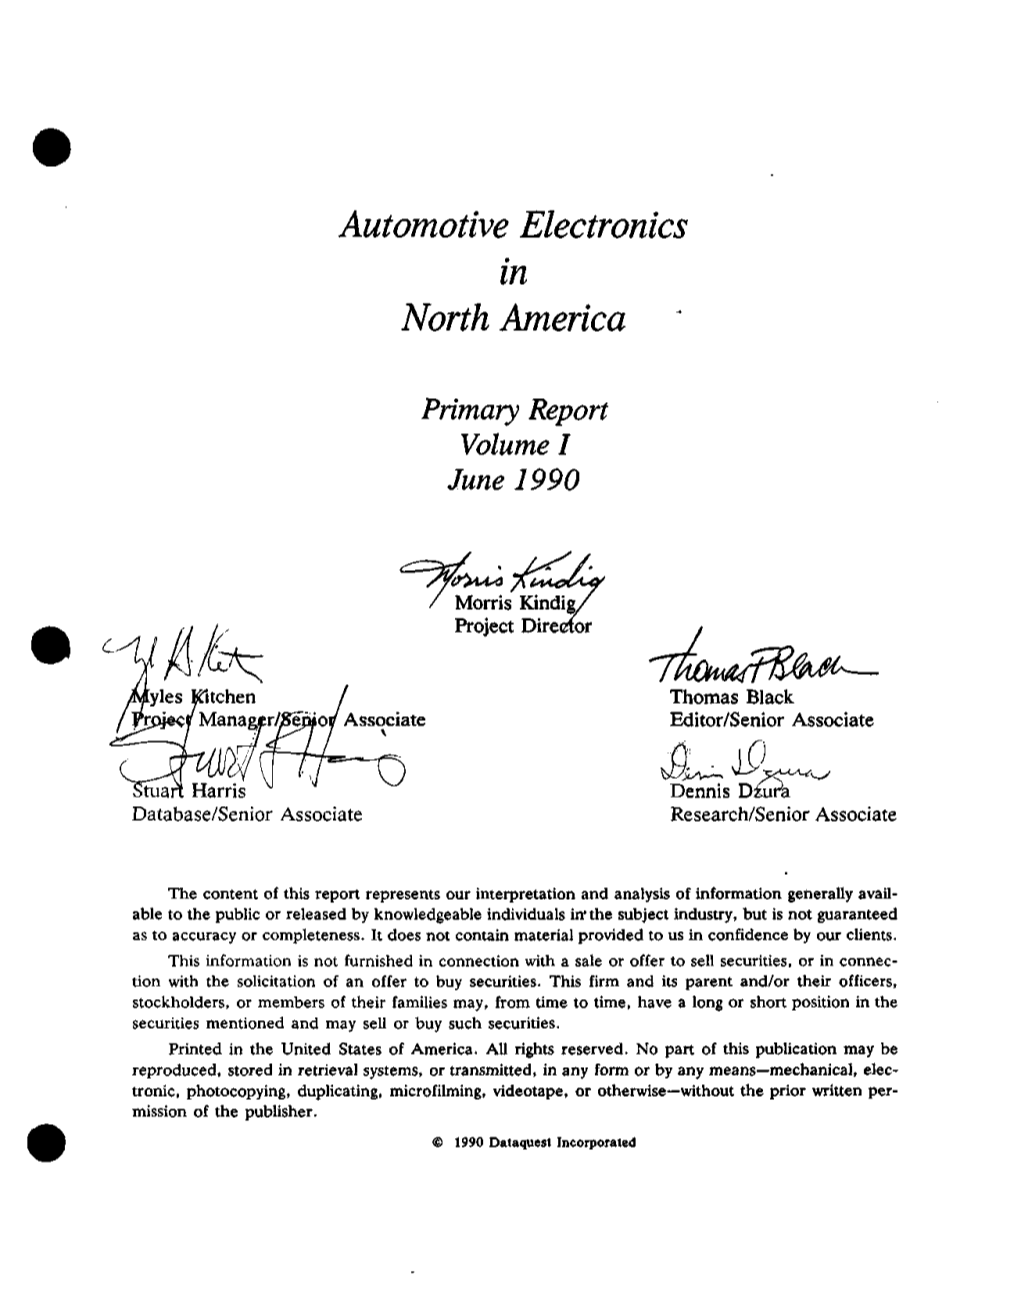 Automotive Electronics in North America